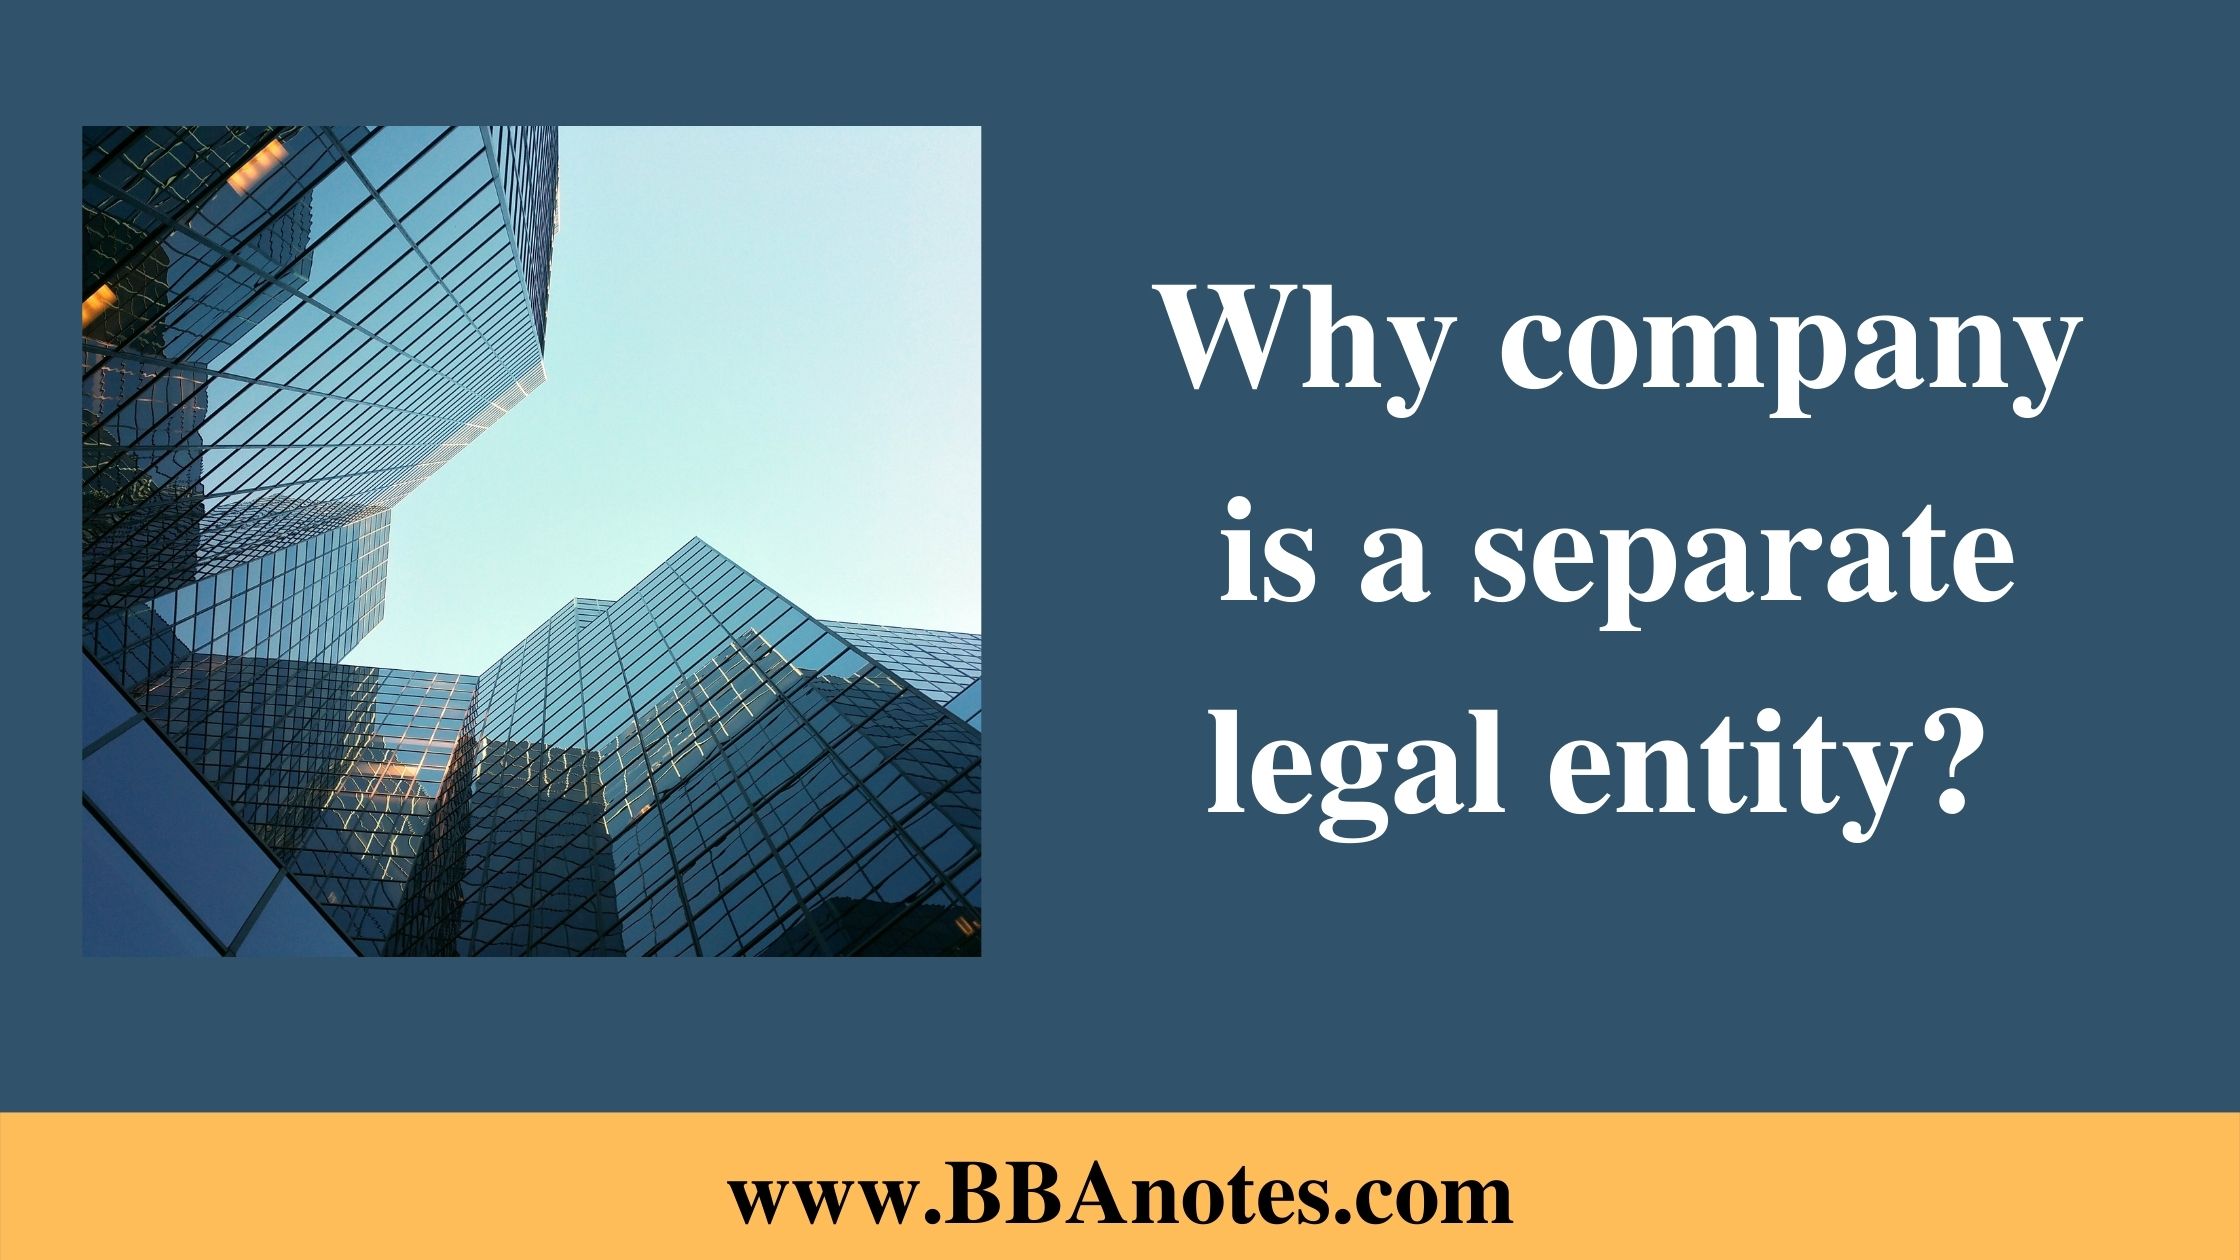 Why company is a separate legal entity?